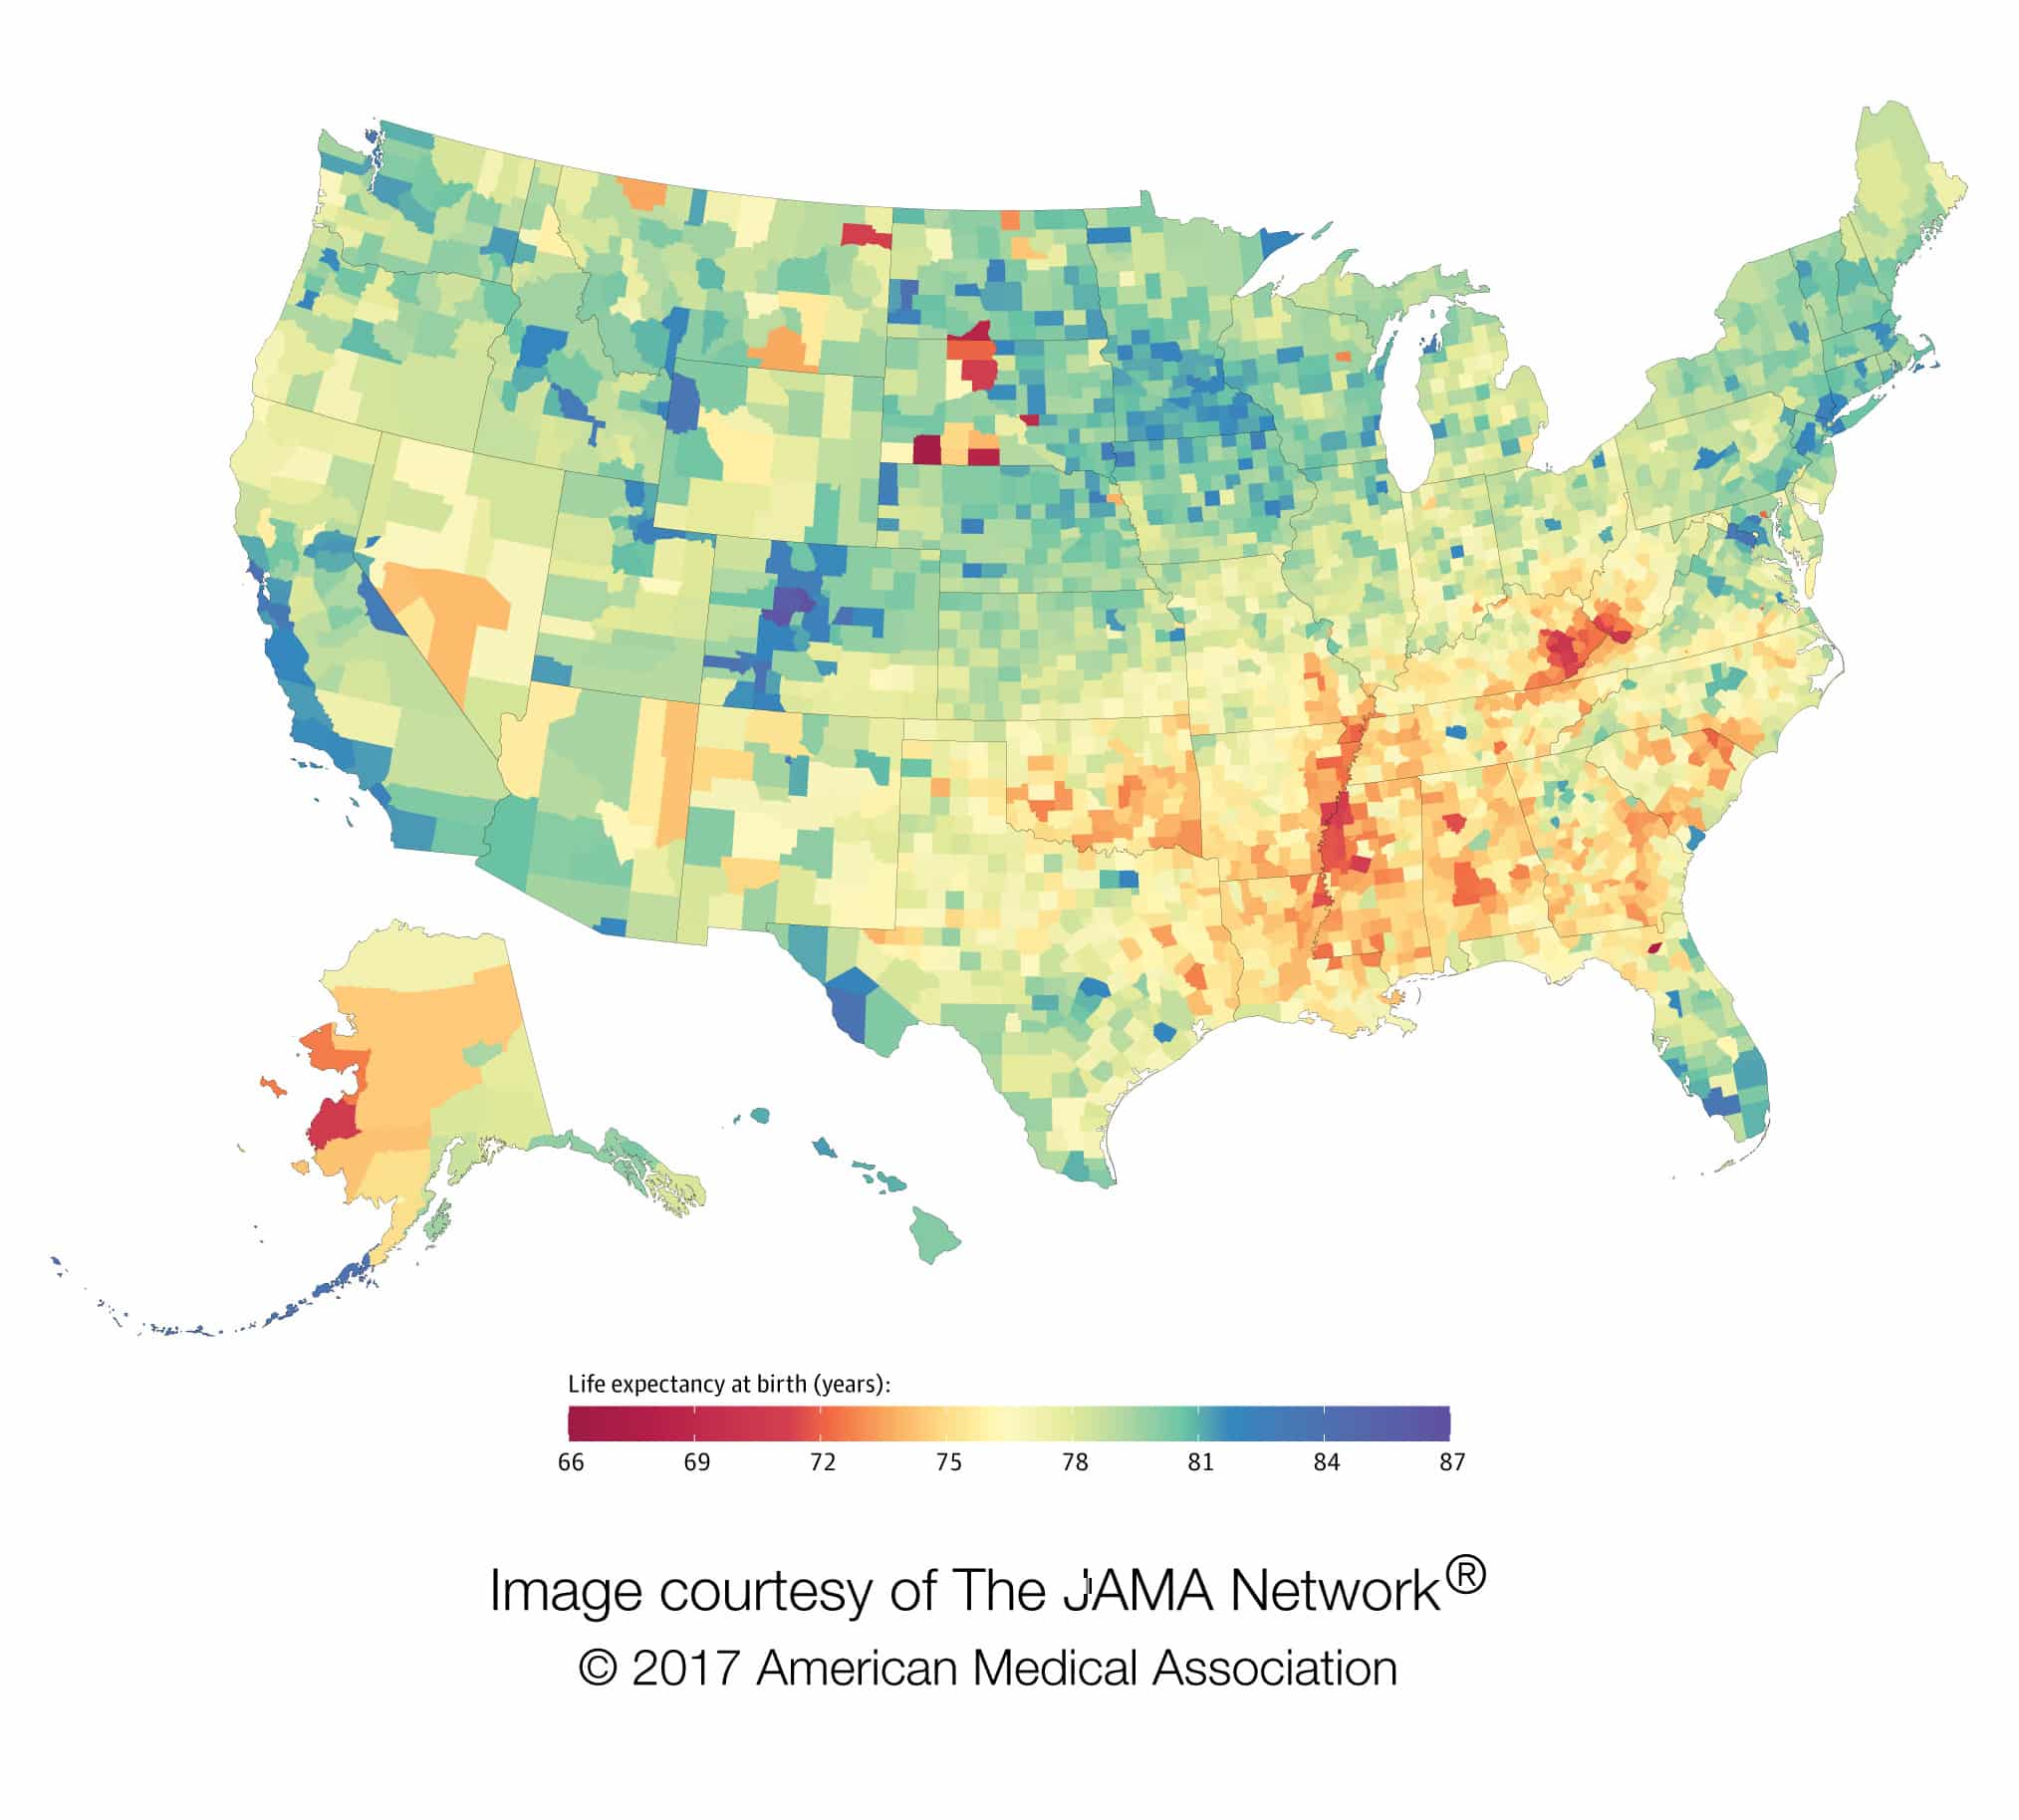 Geographic Disparities in Life Expectancy Among U.S. Counties